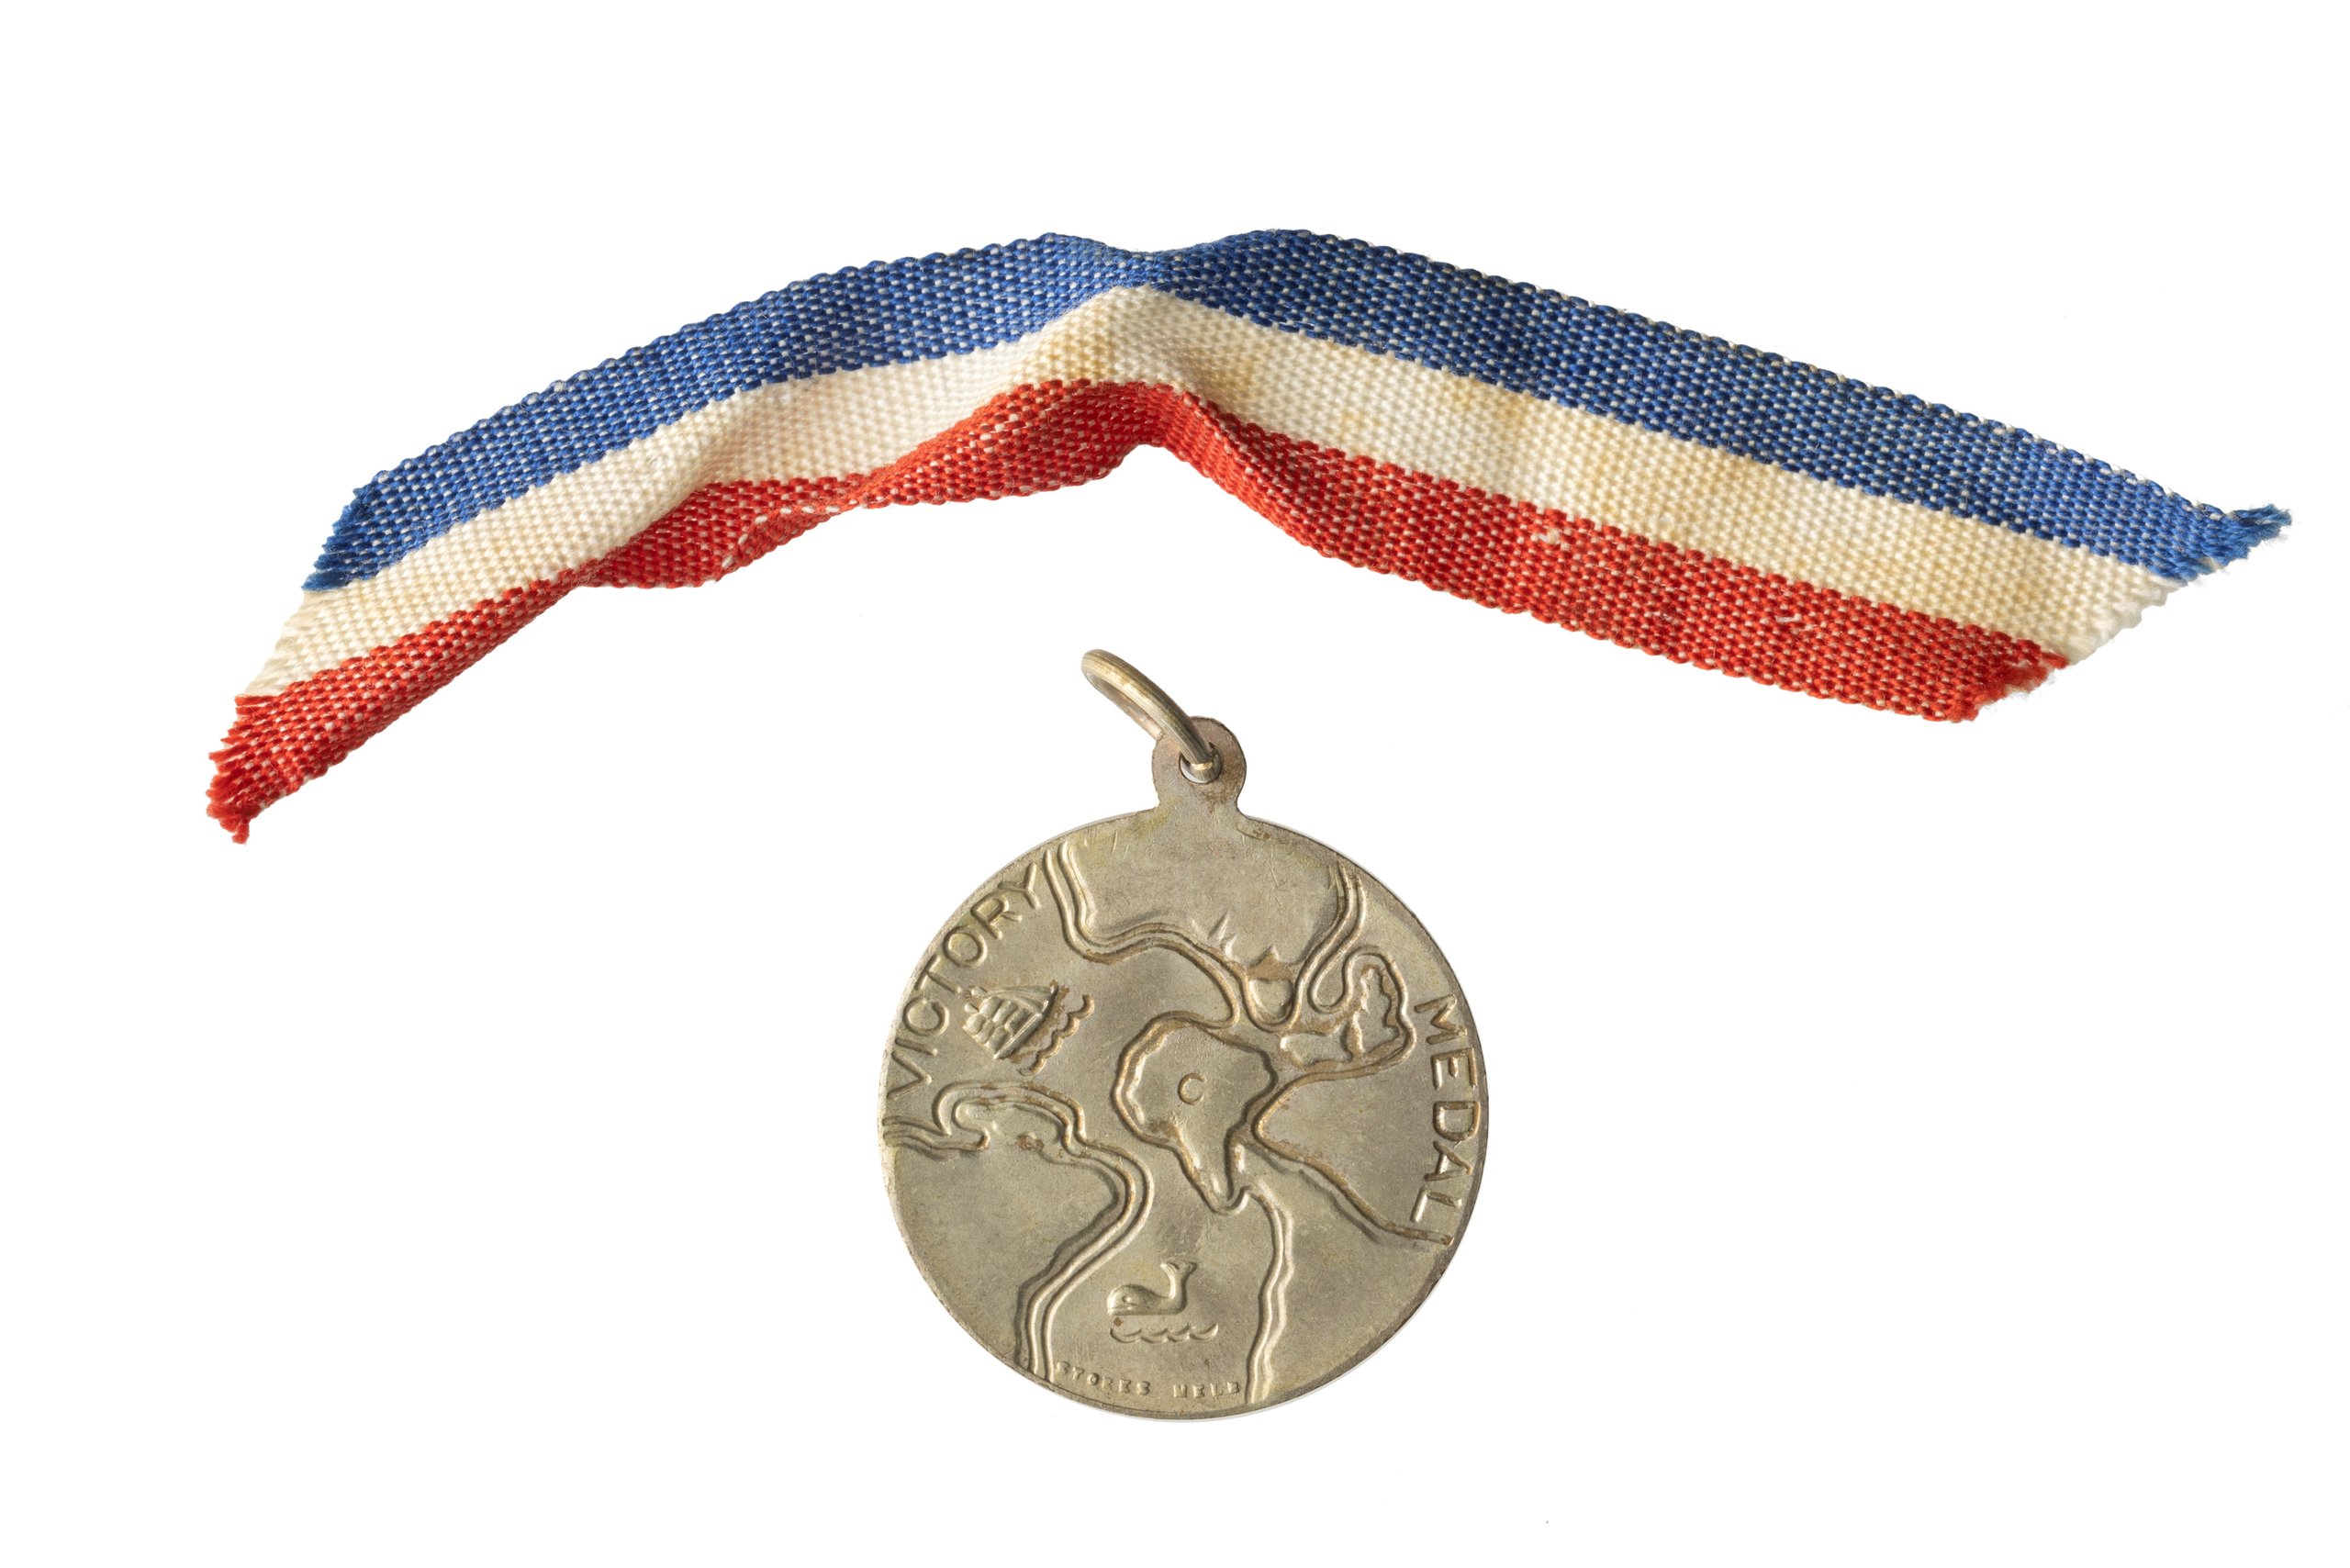 School Childrens Victory medal commemorating the end of WW II in Europe